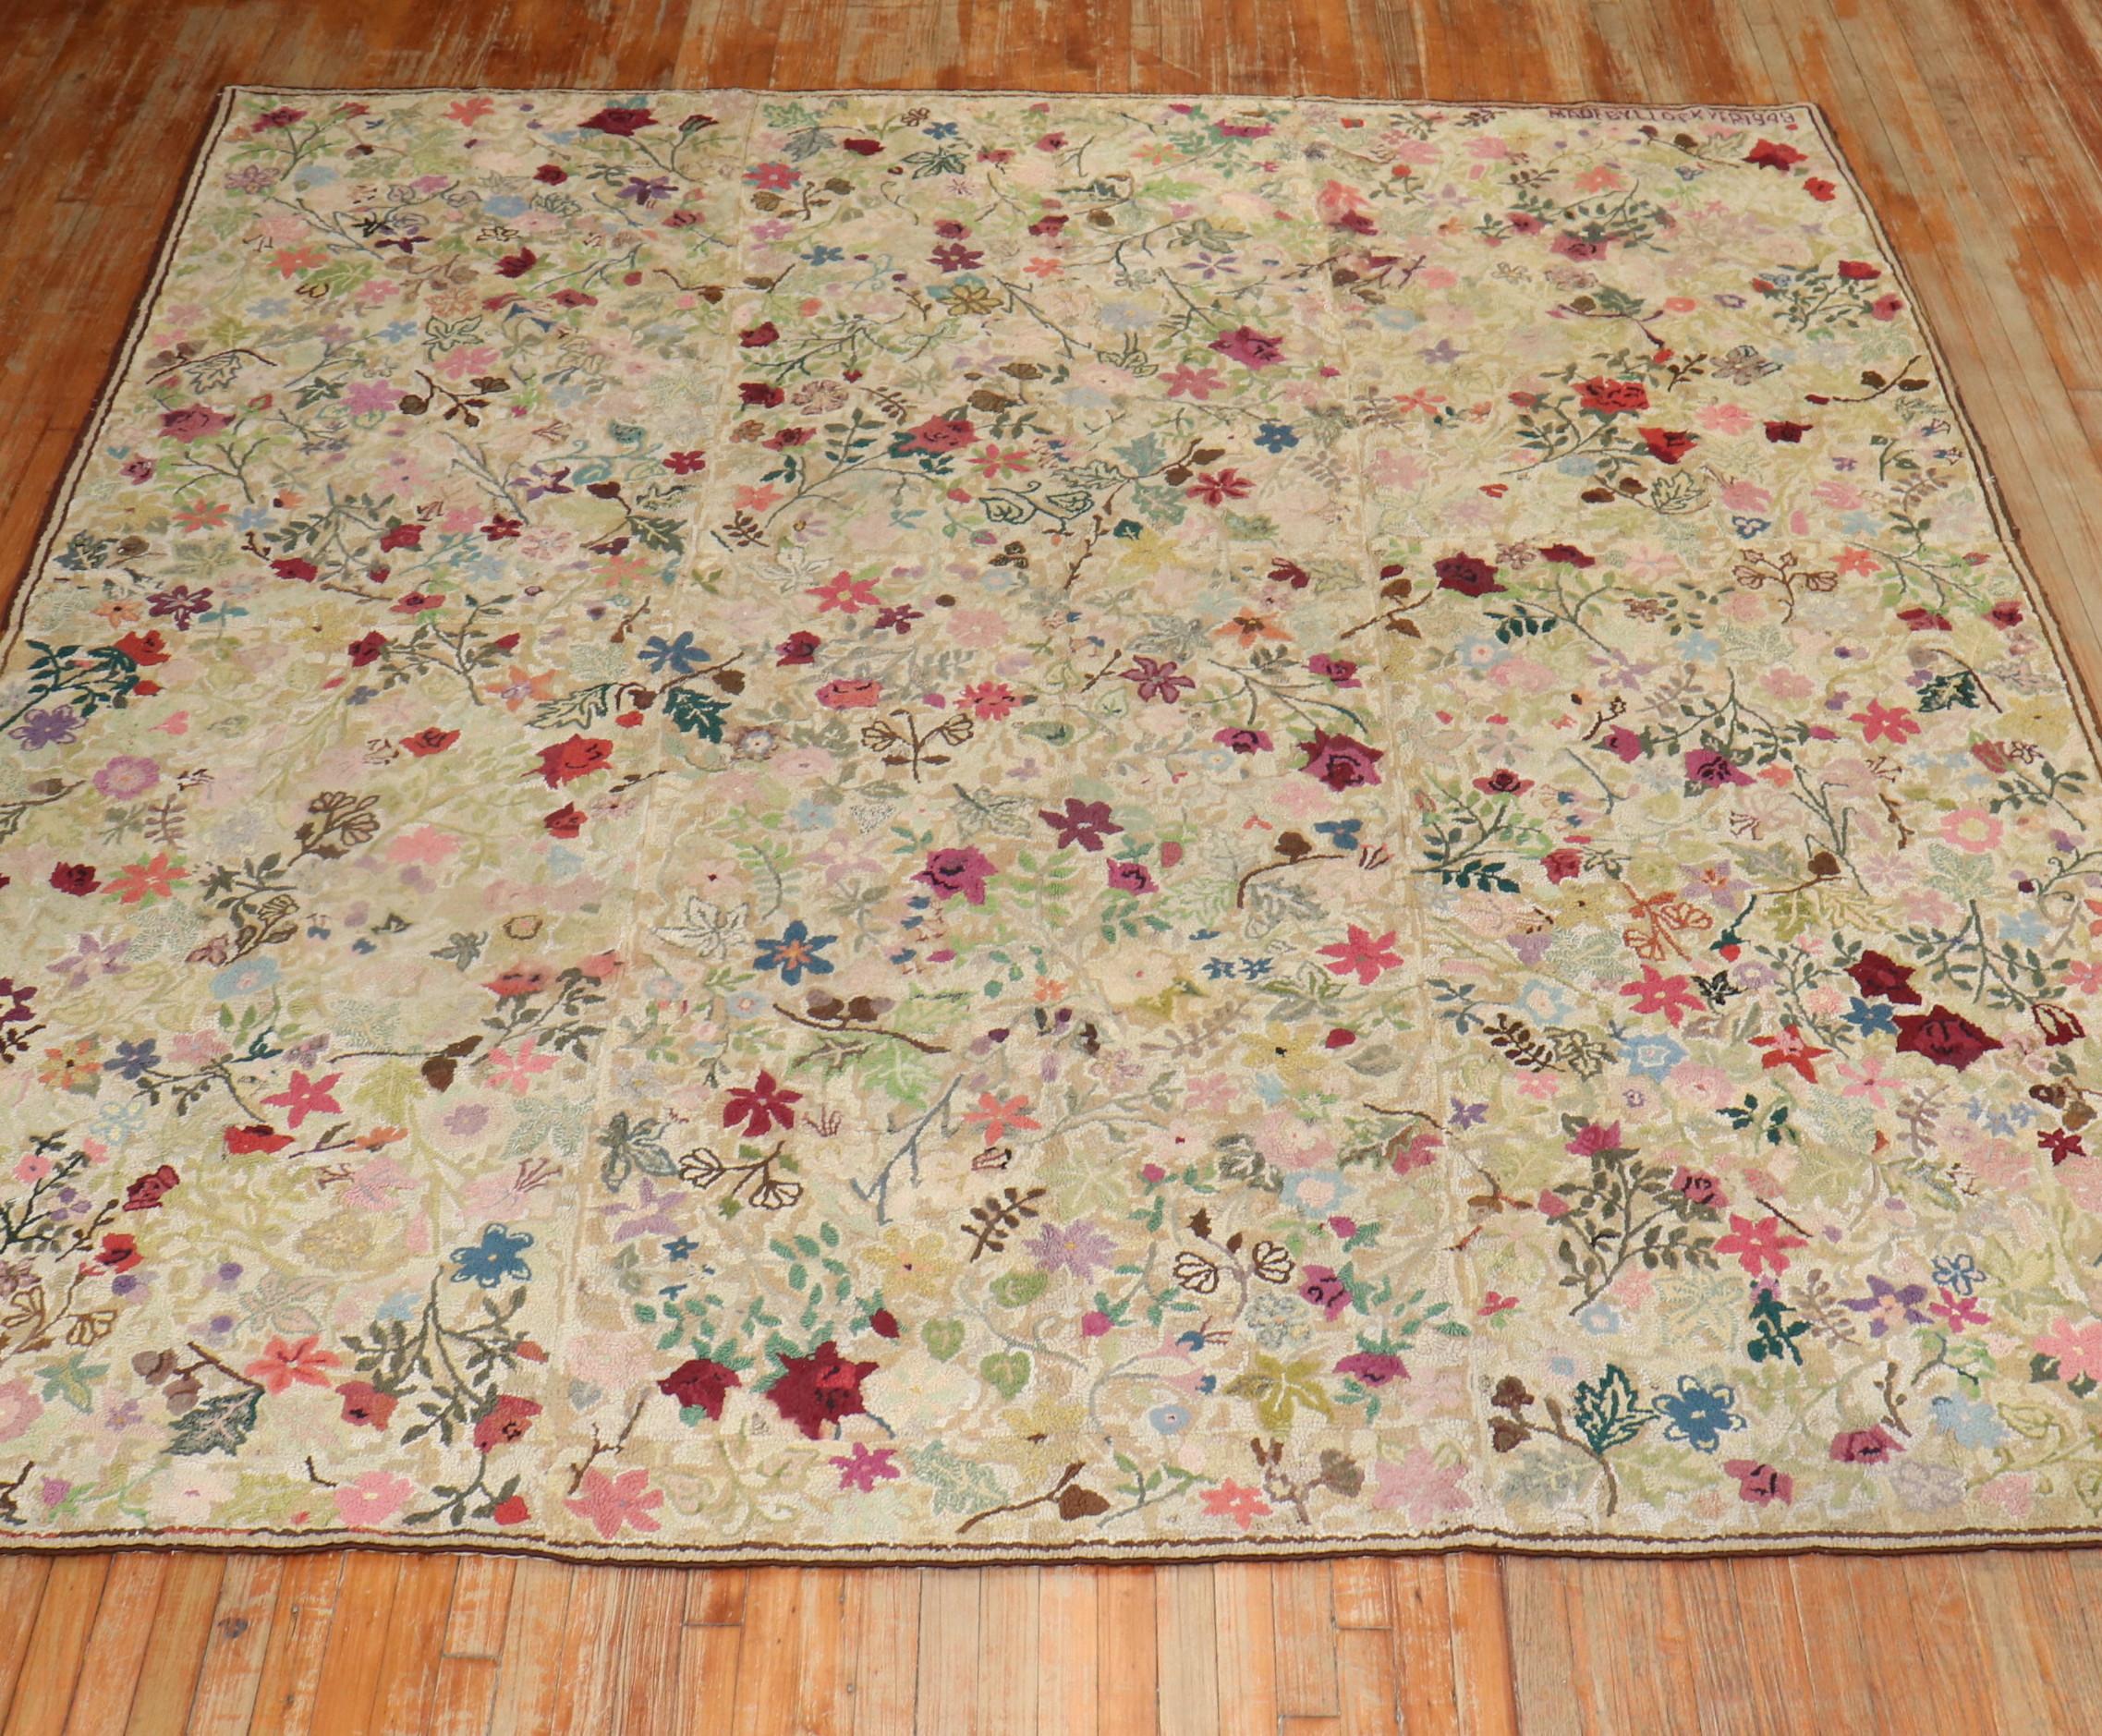 An American Hooked Square Floral Botanical carpet custom-made in 1949. It reads 